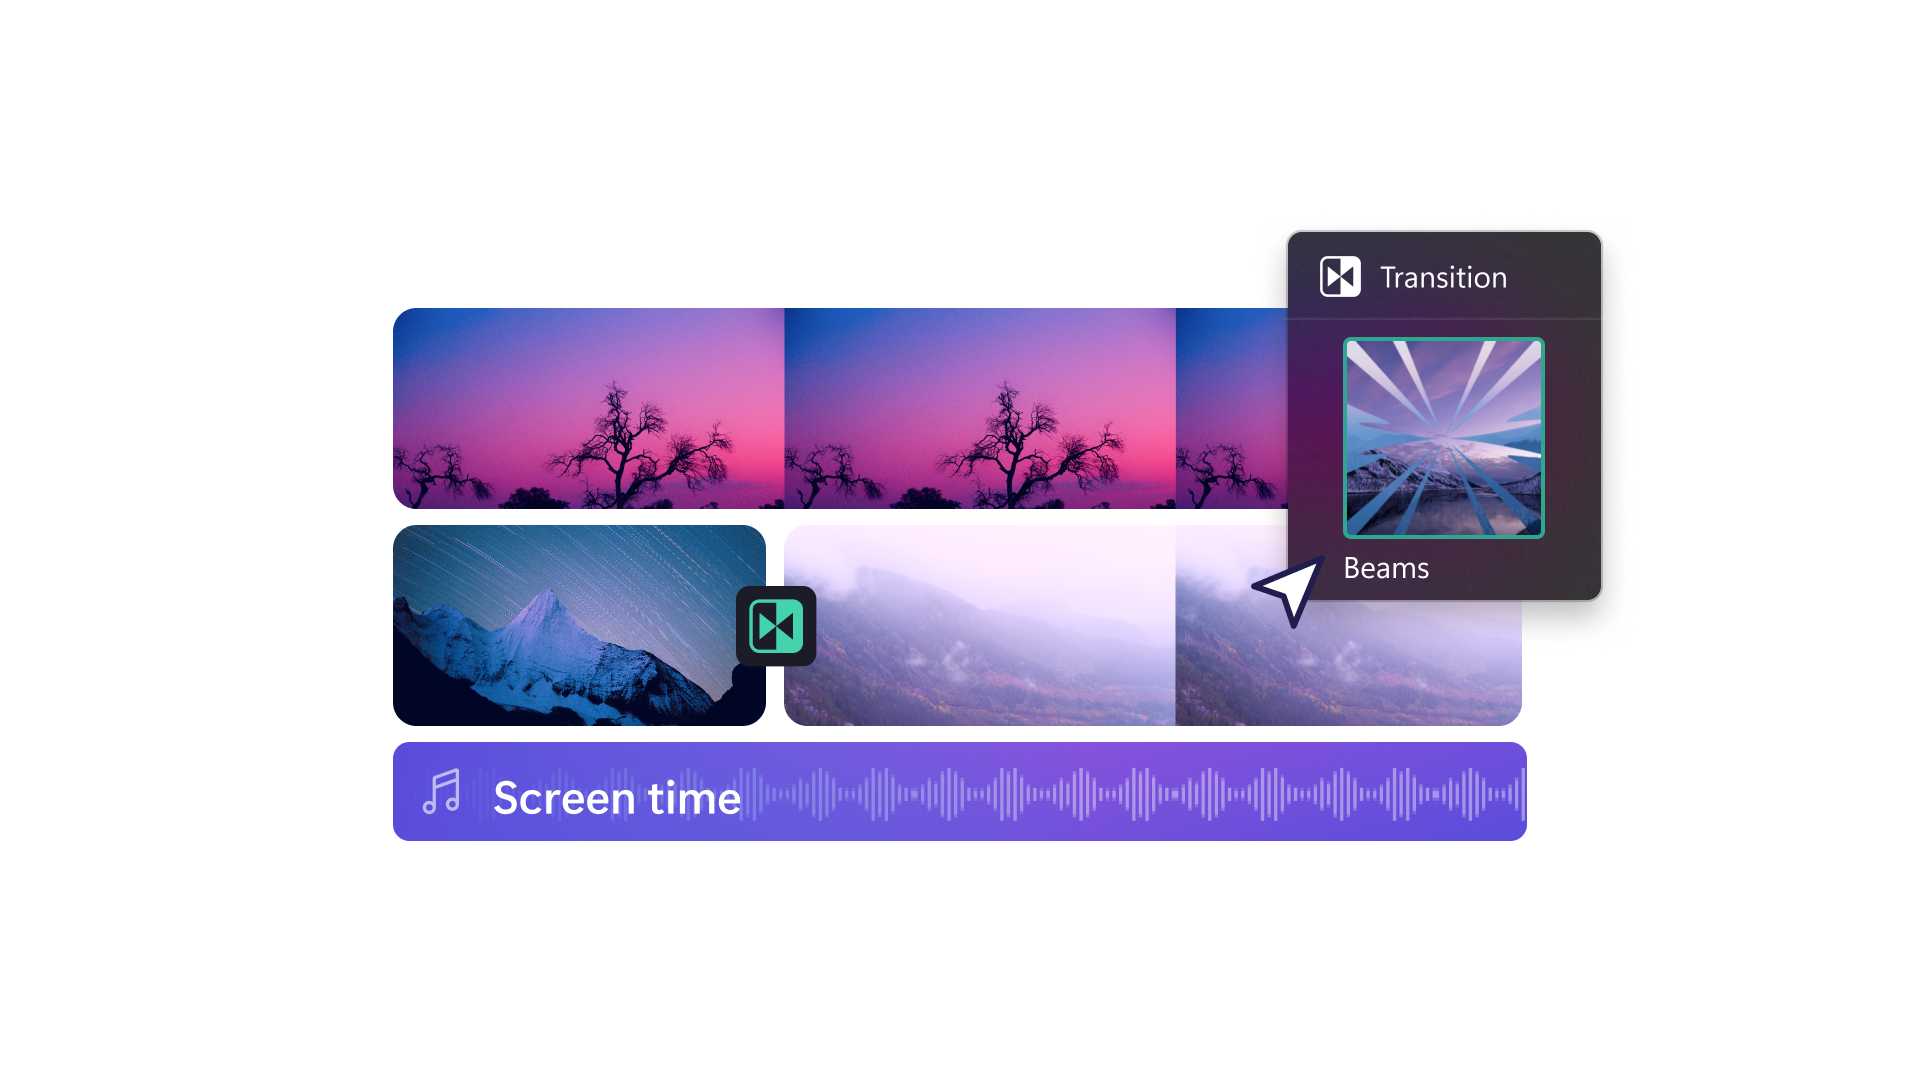 An image of different media being edited in Clipchamp. It shows videos of nature, music and a transition.